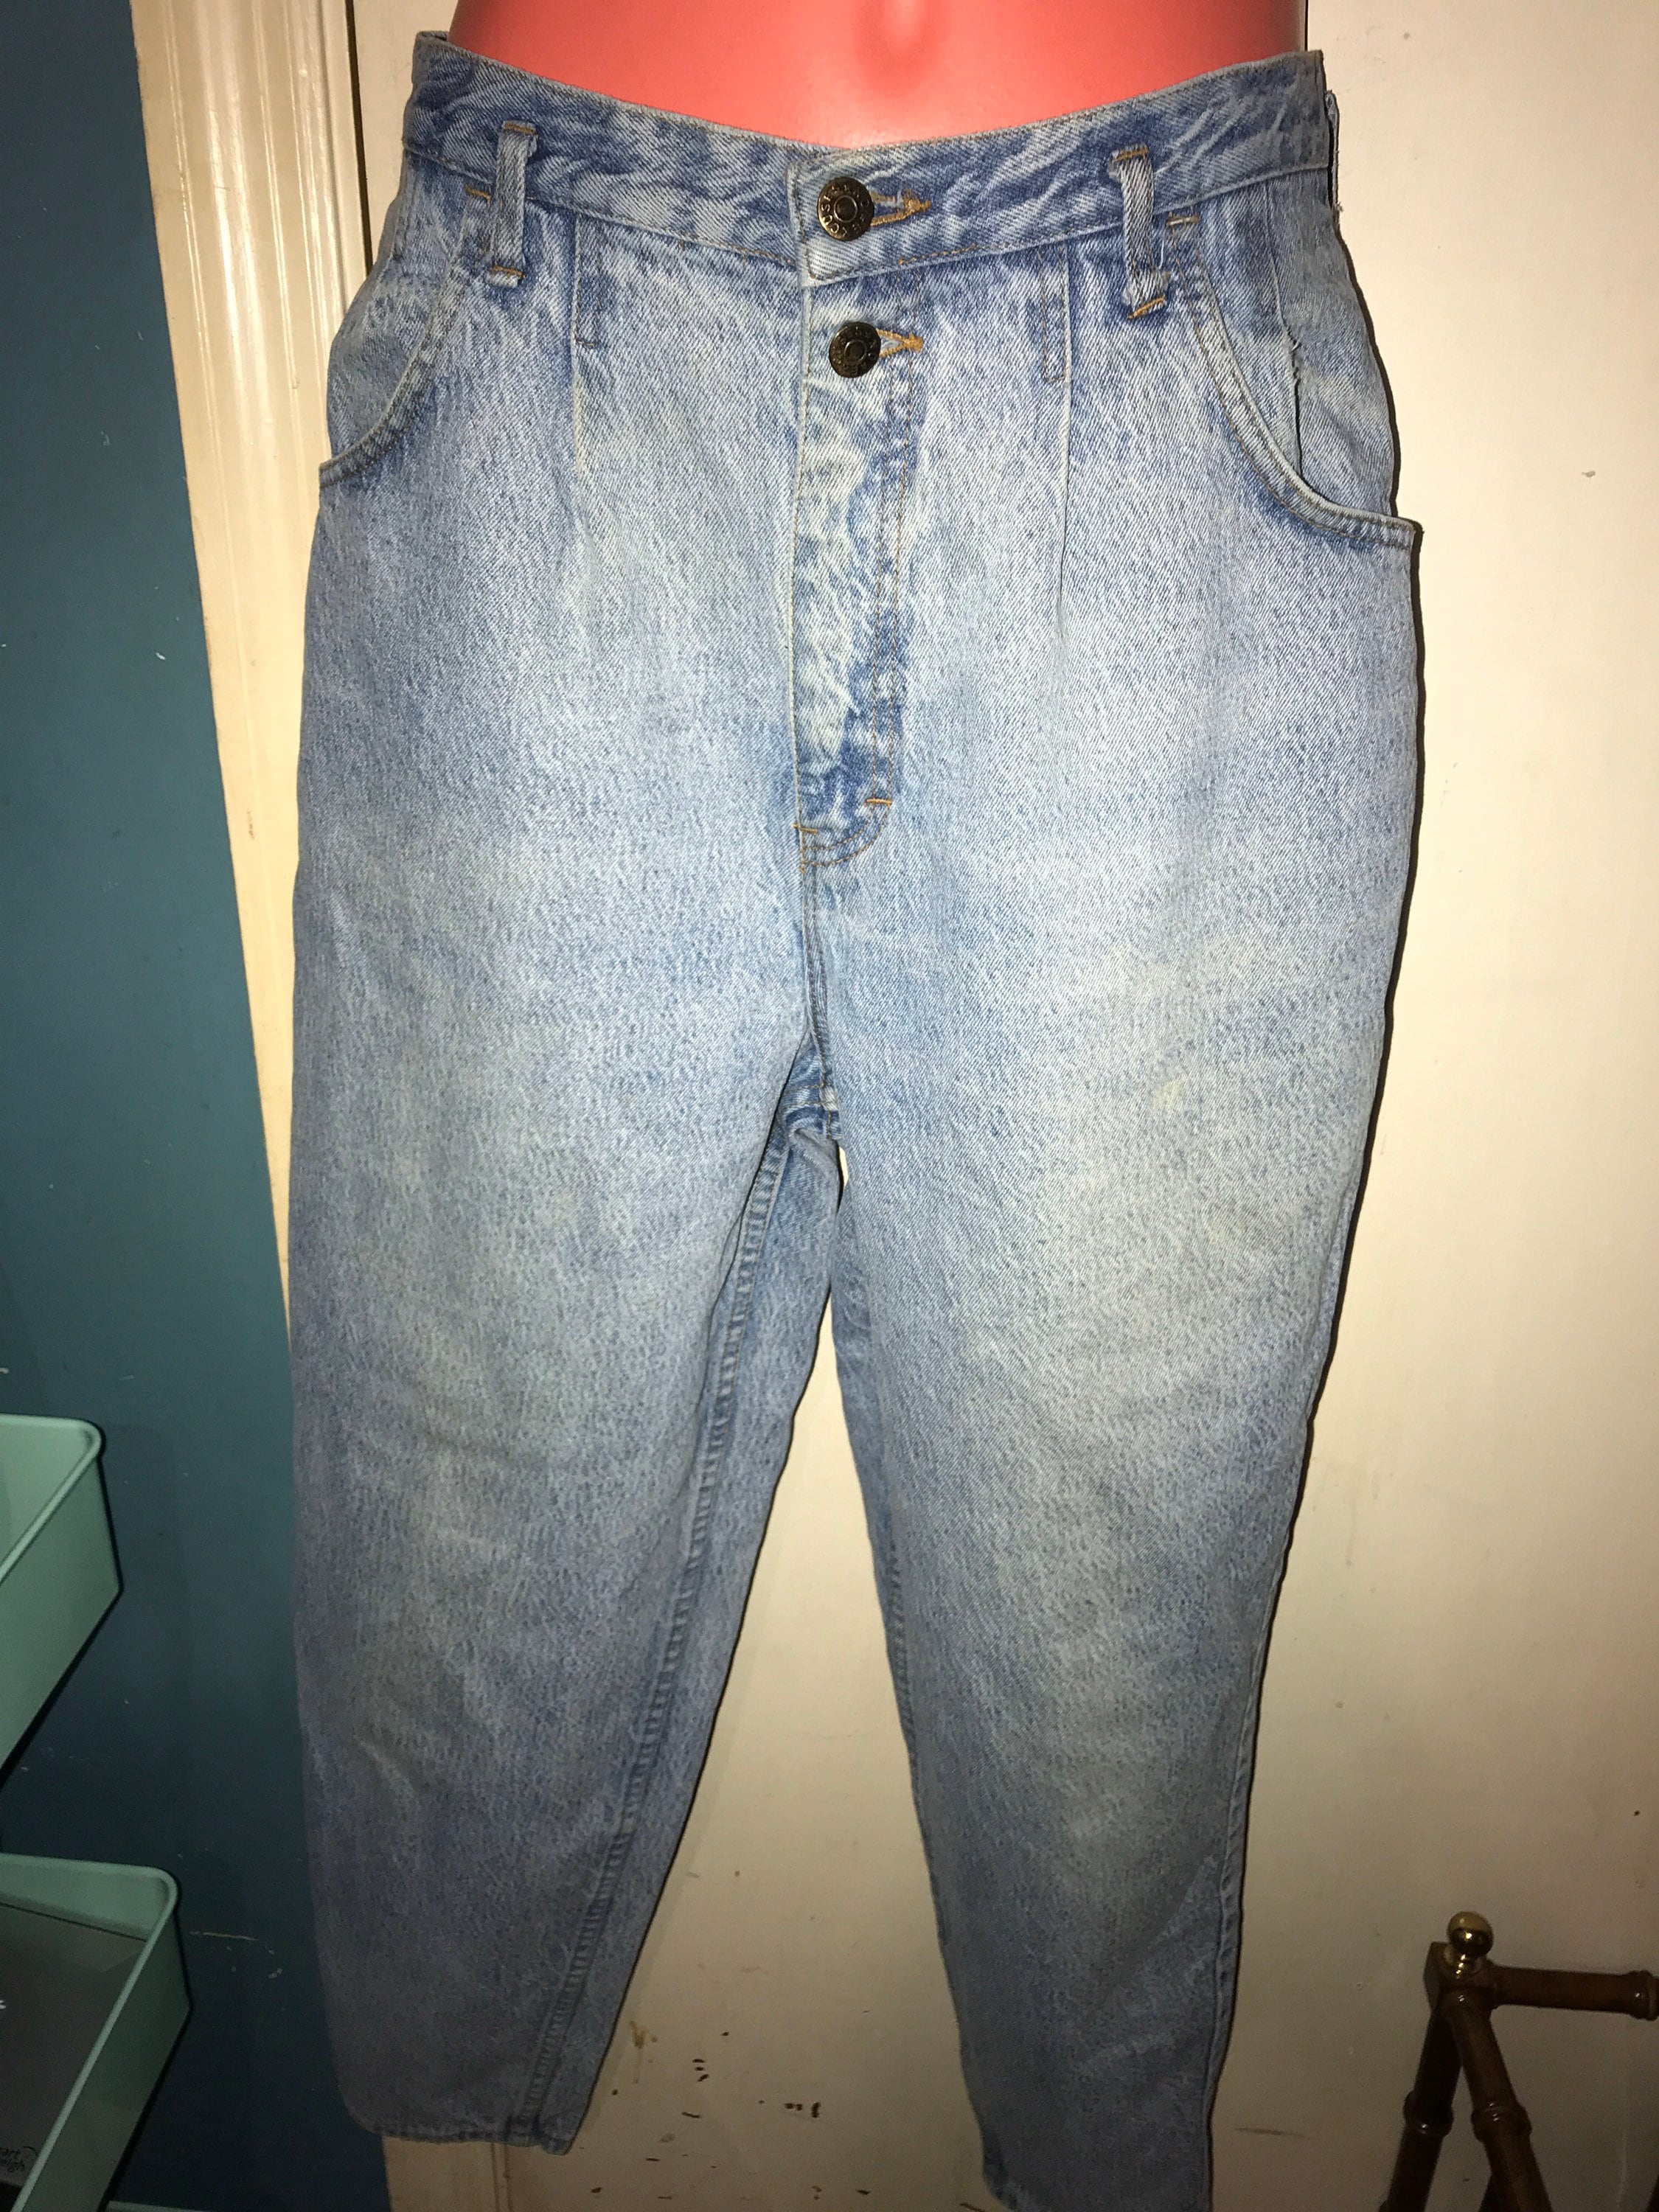 Jeans. Vintage Etsy Size No Excuses Stone Jeans. Vintage 1980\'s Excuses Jeans. 13 Wash 80s - Mom Jeans. No